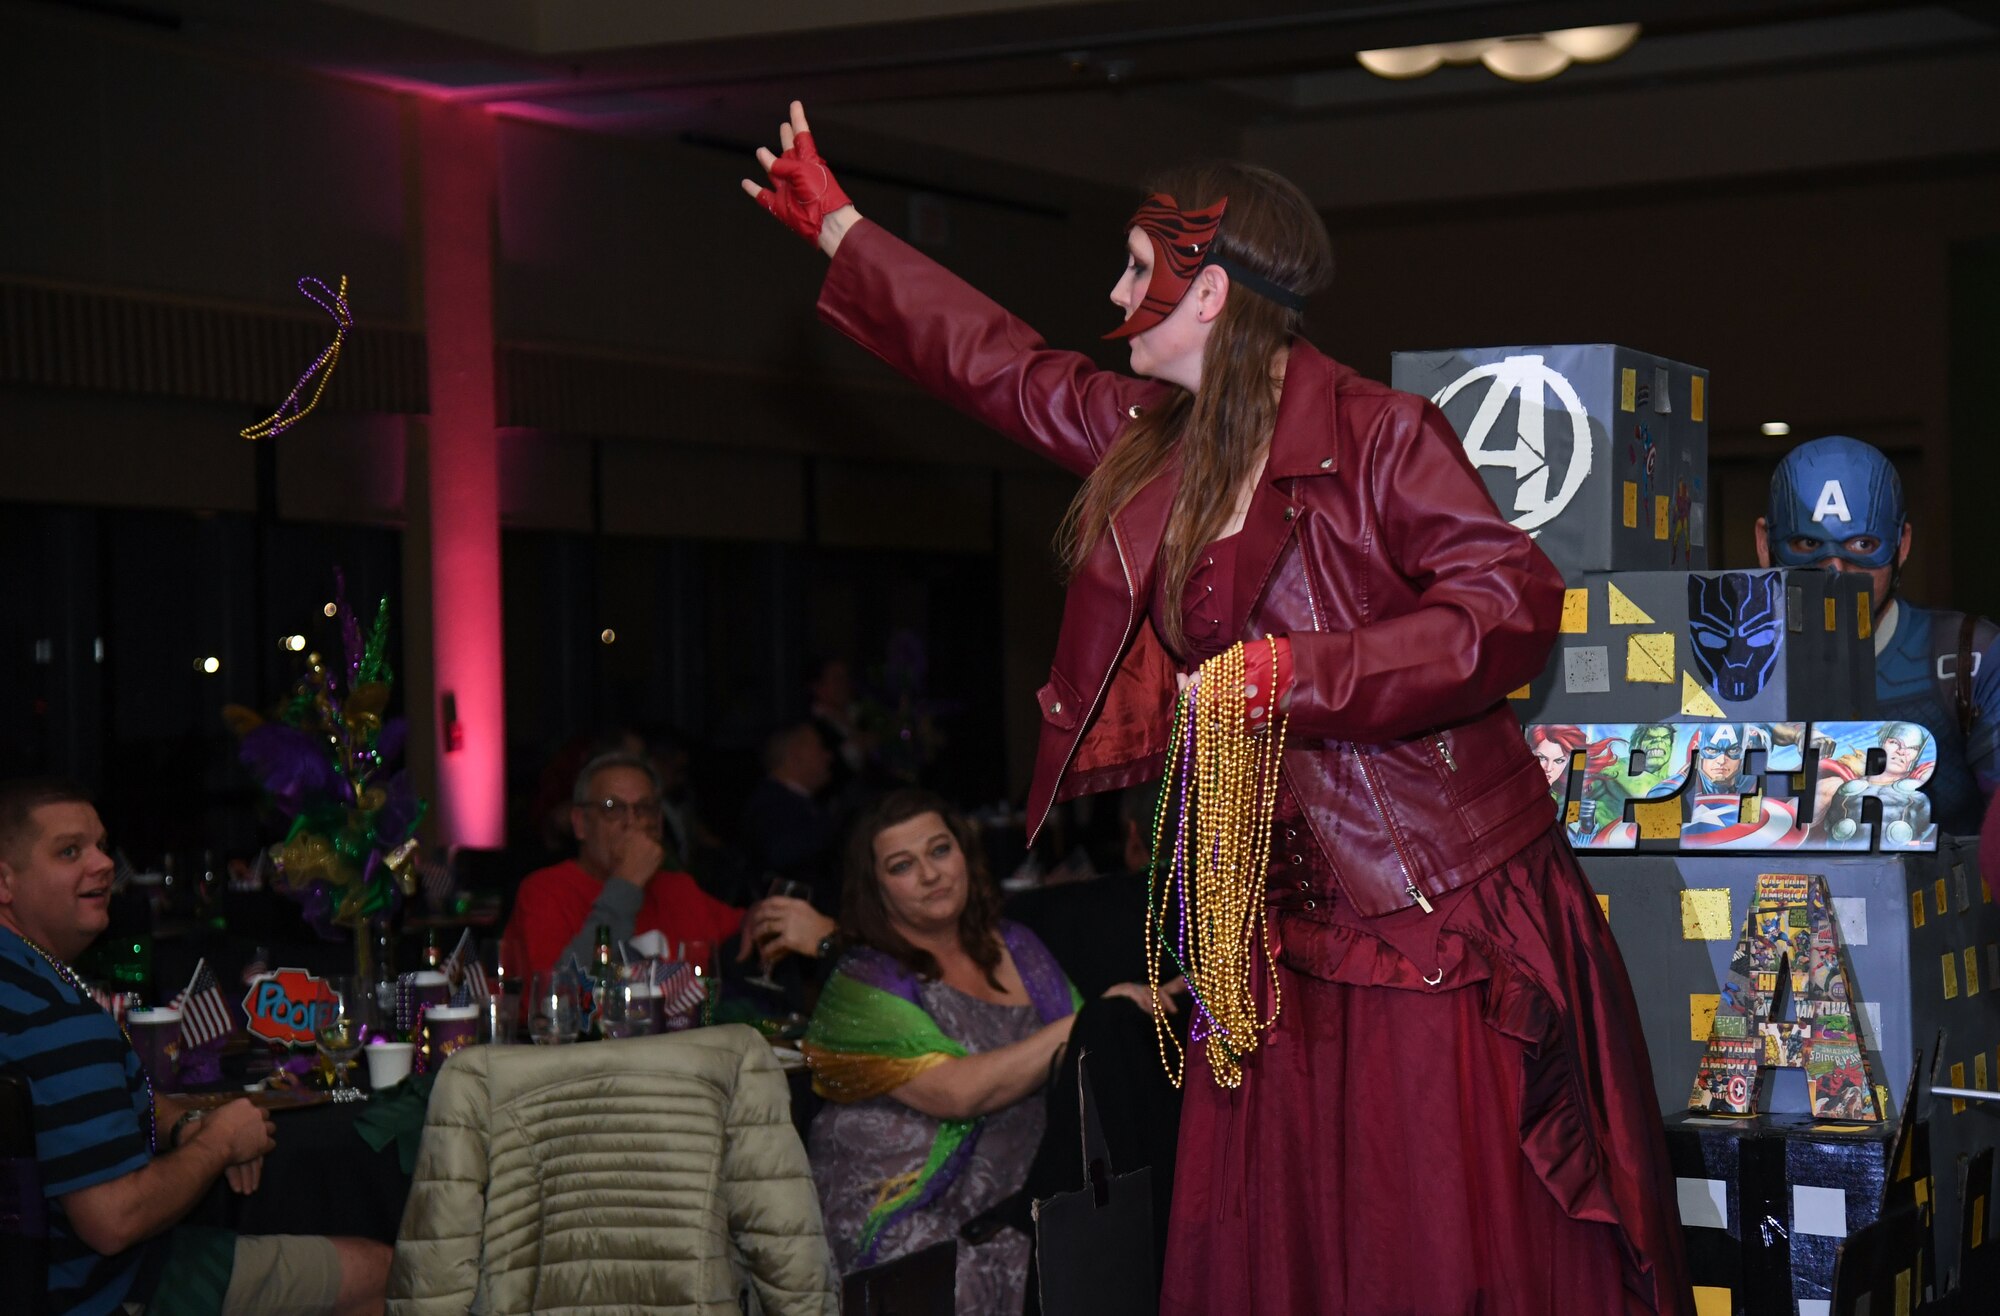 U.S. Air Force Staff Sgt. Kasondra Amacher, 81st Diagnostic and Therapeutics Squadron ultrasound technician, portrays Wanda Maximoff as she tosses beads to the crowd during the 32nd Annual Krewe of Medics Mardi Gras Ball at the Bay Breeze Event Center on Keesler Air Force Base, Mississippi, Feb. 11, 2023.